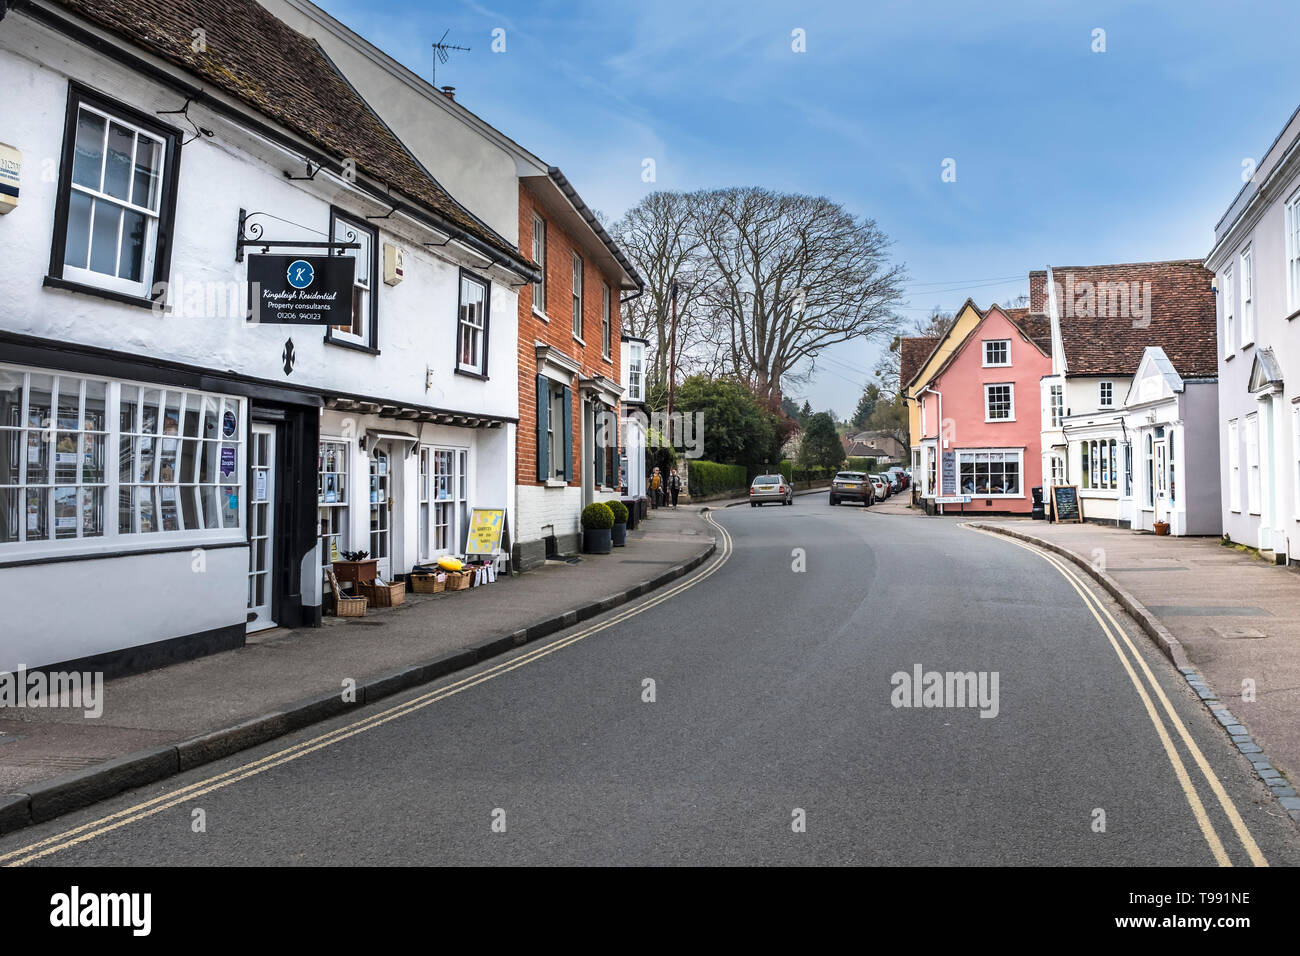 View along one of the streets lined with old houses in Dedham. Stock Photo